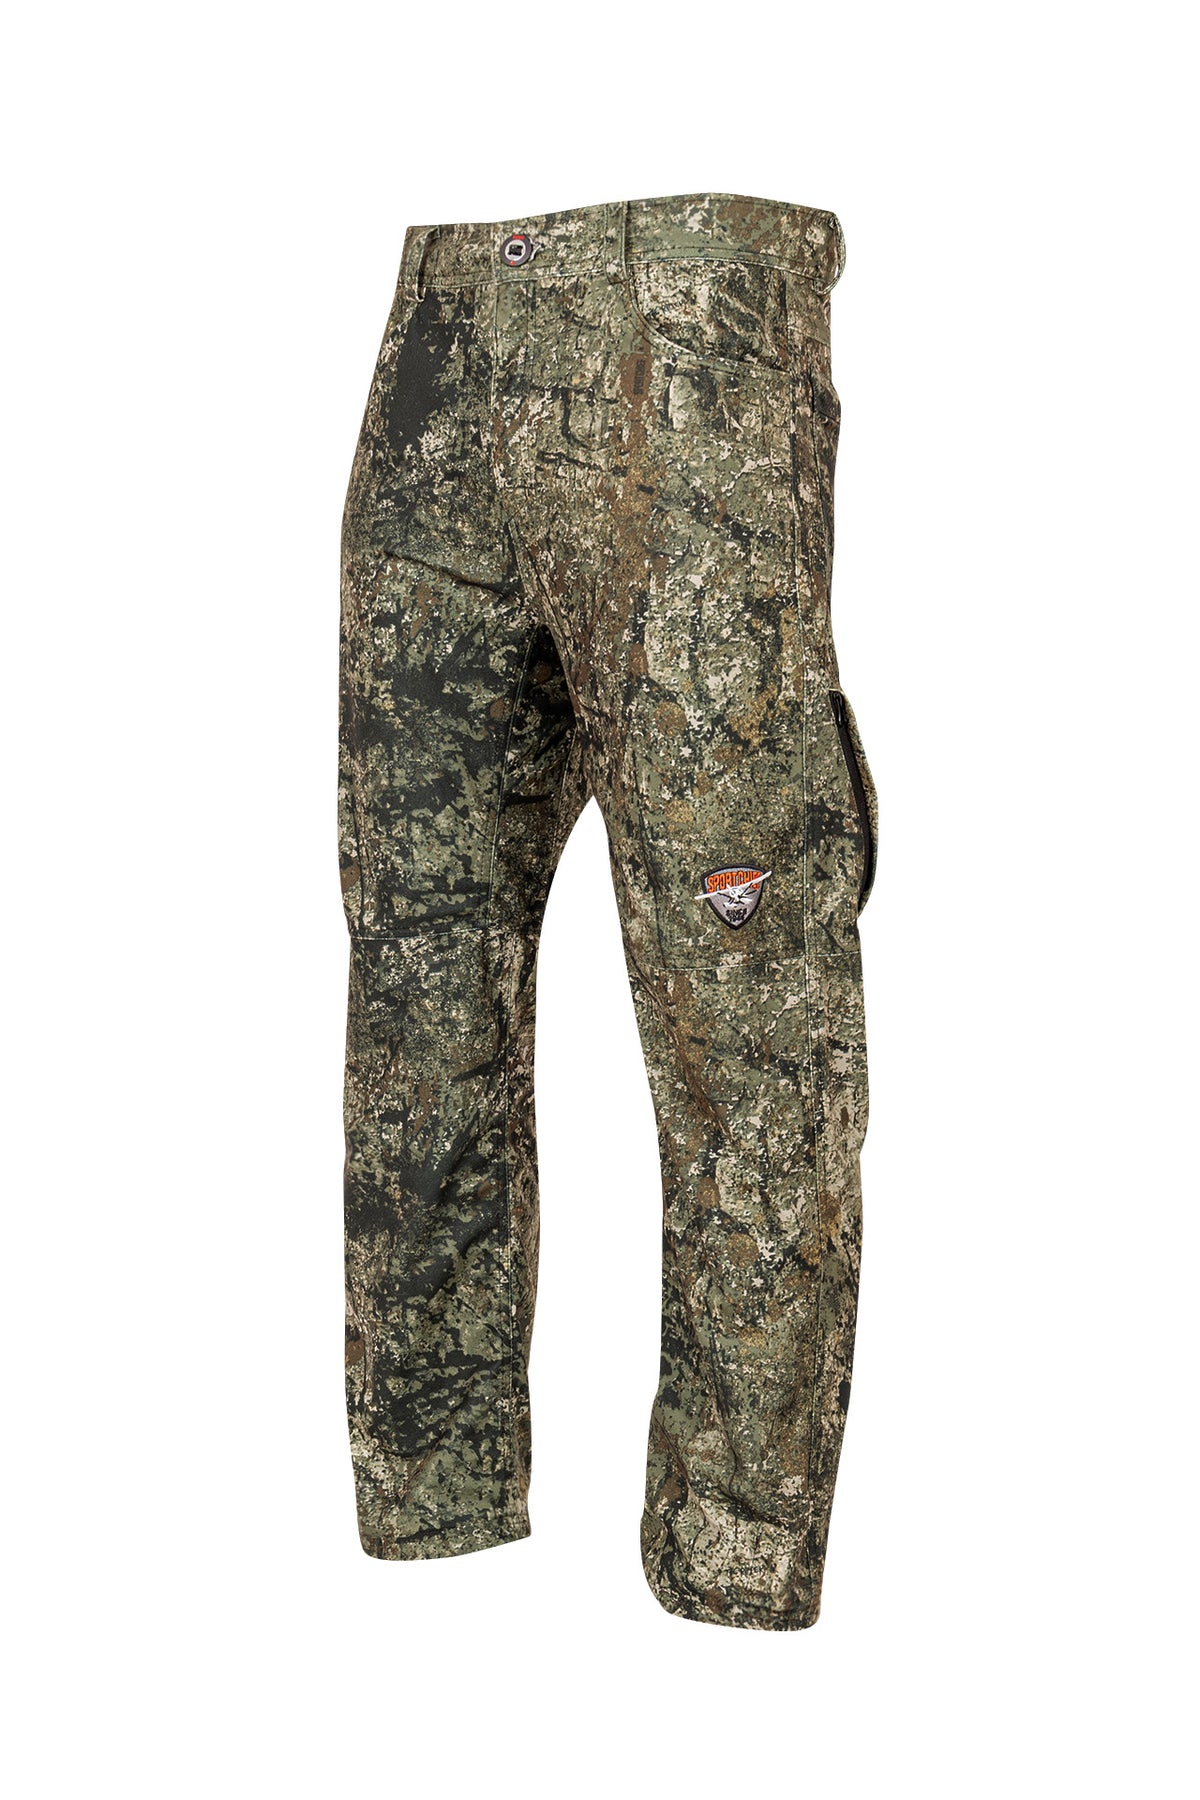 Hunting pants for men Heavy Duty, 38 / The Ripper